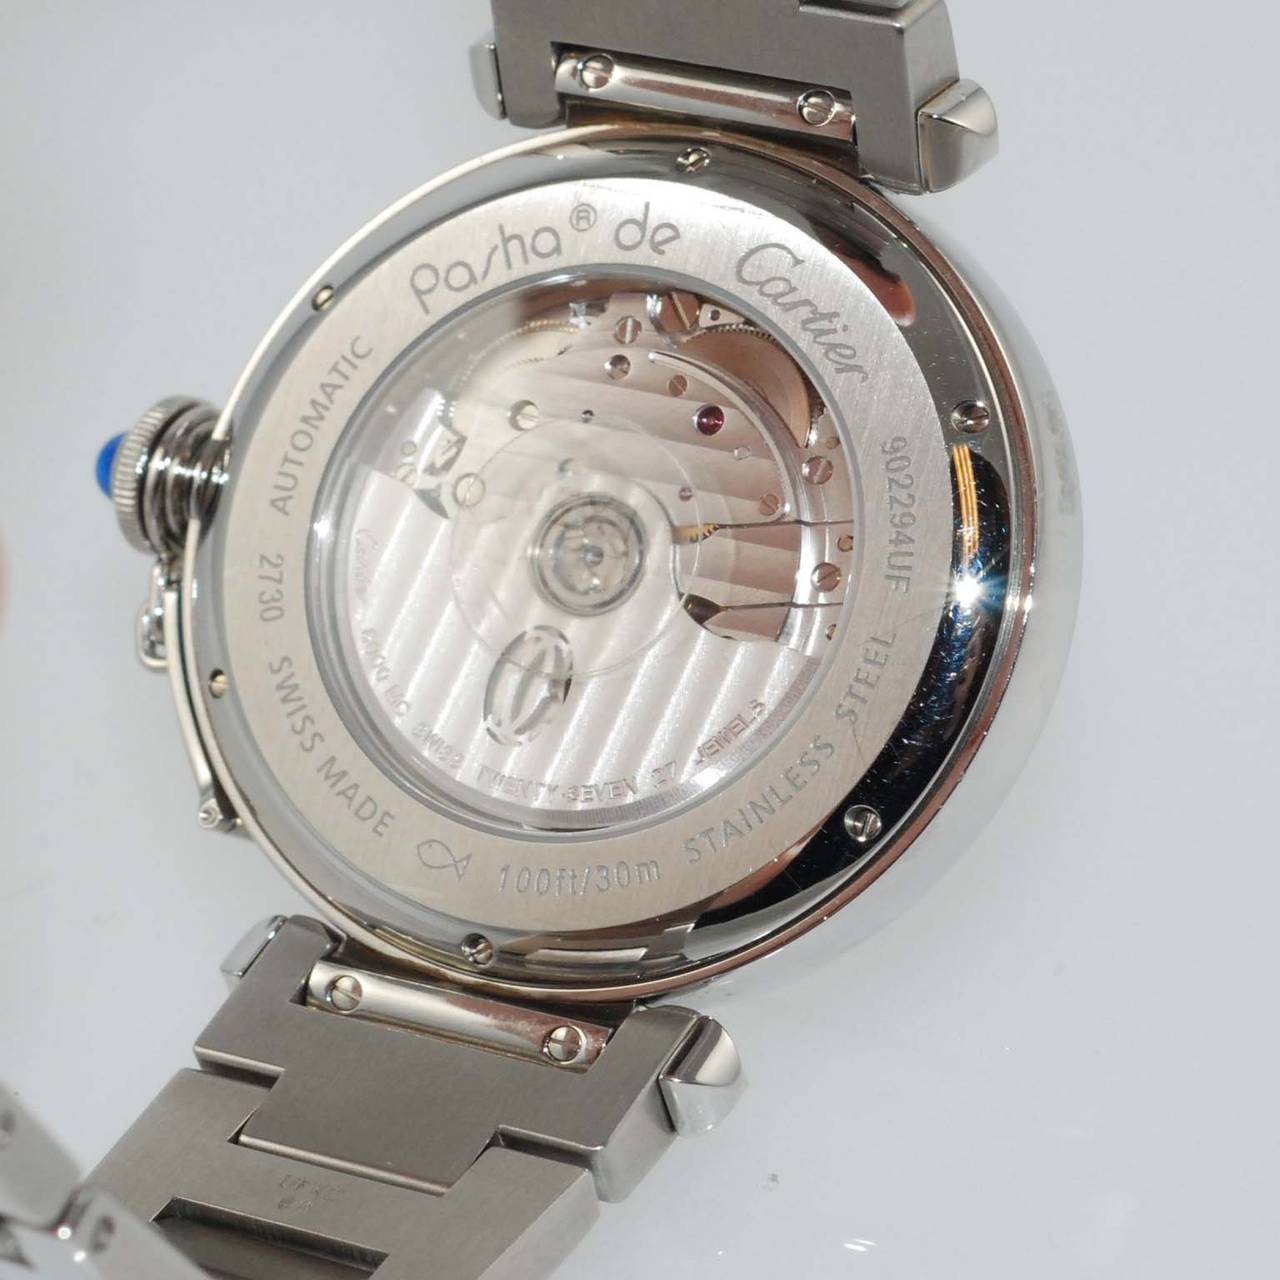 Cartier stainless steel Pasha wristwatch, automatic movement, 42mm, exhibition back, Arabic and baton indexes, with stainless steel bracelet.

Like-new in box
Originally listed for $8550.